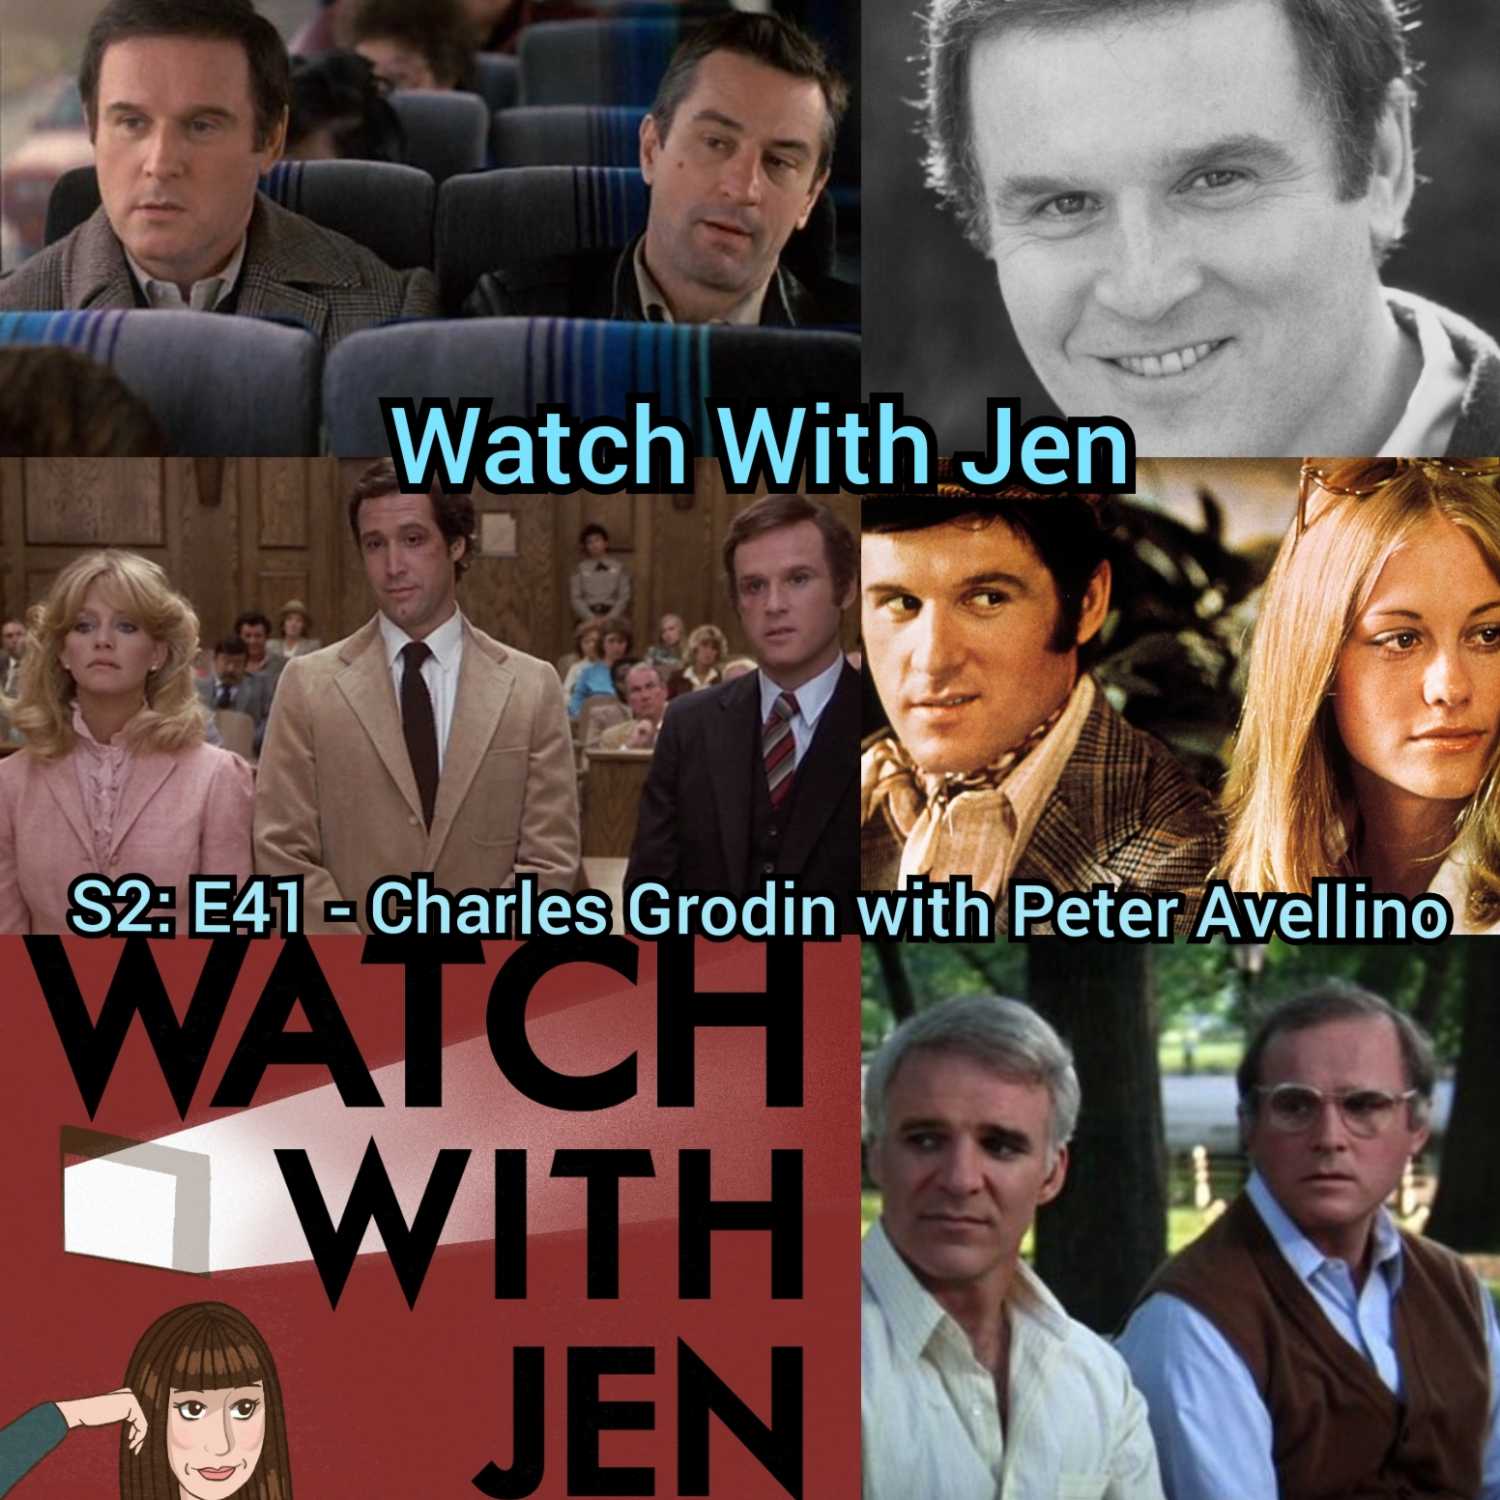 Watch With Jen - S2: E41 - Charles Grodin with Peter Avellino